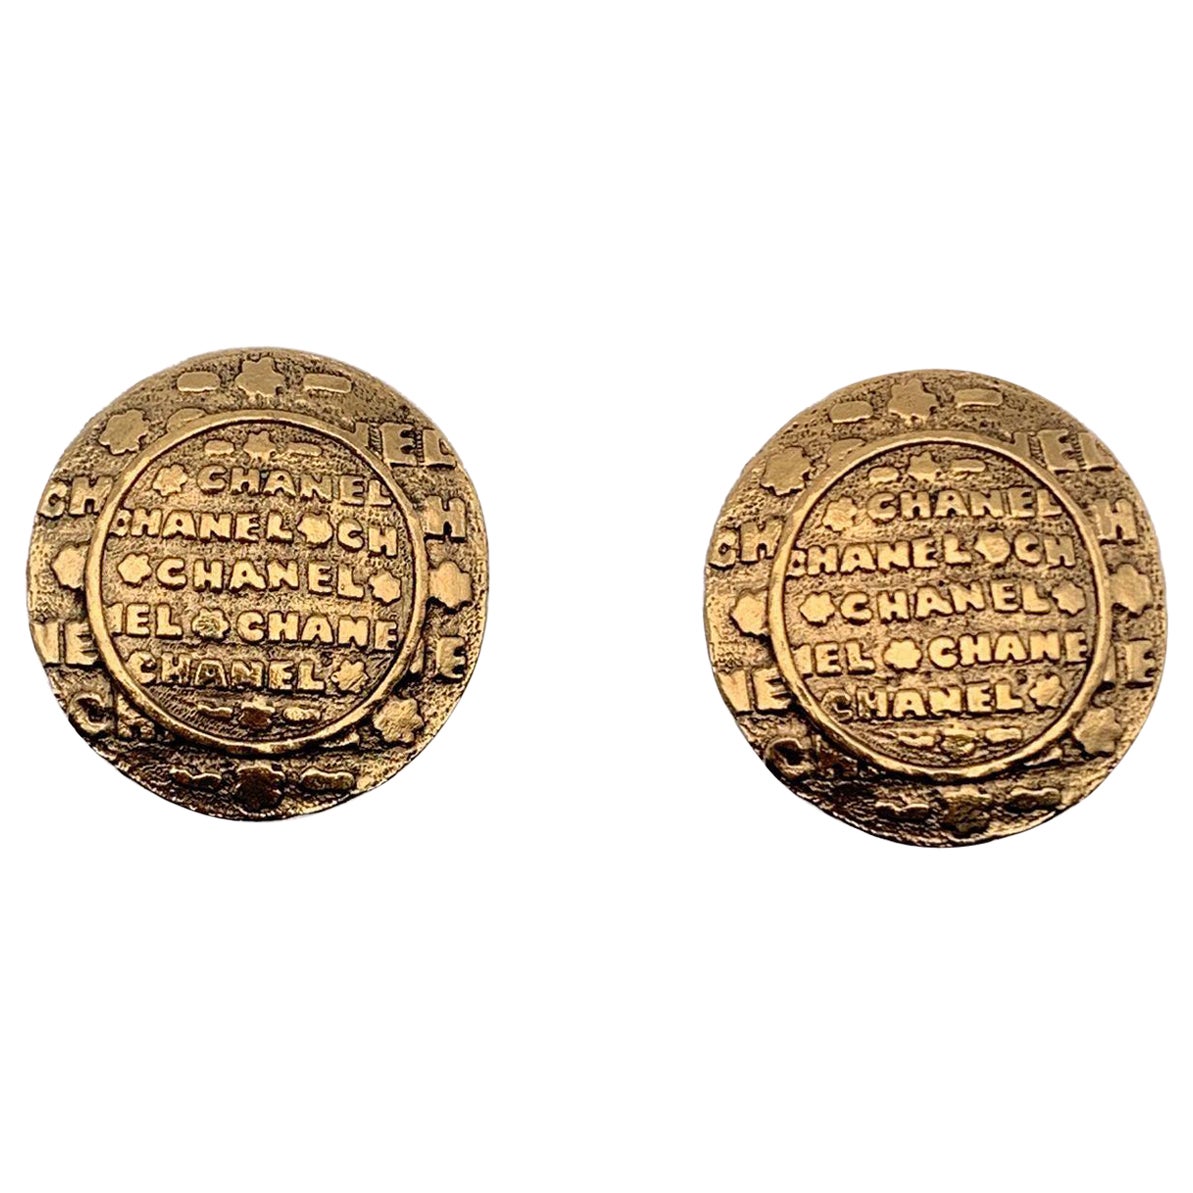 Chanel Vintage Gold Metal Round Embossed Clip On Earrings